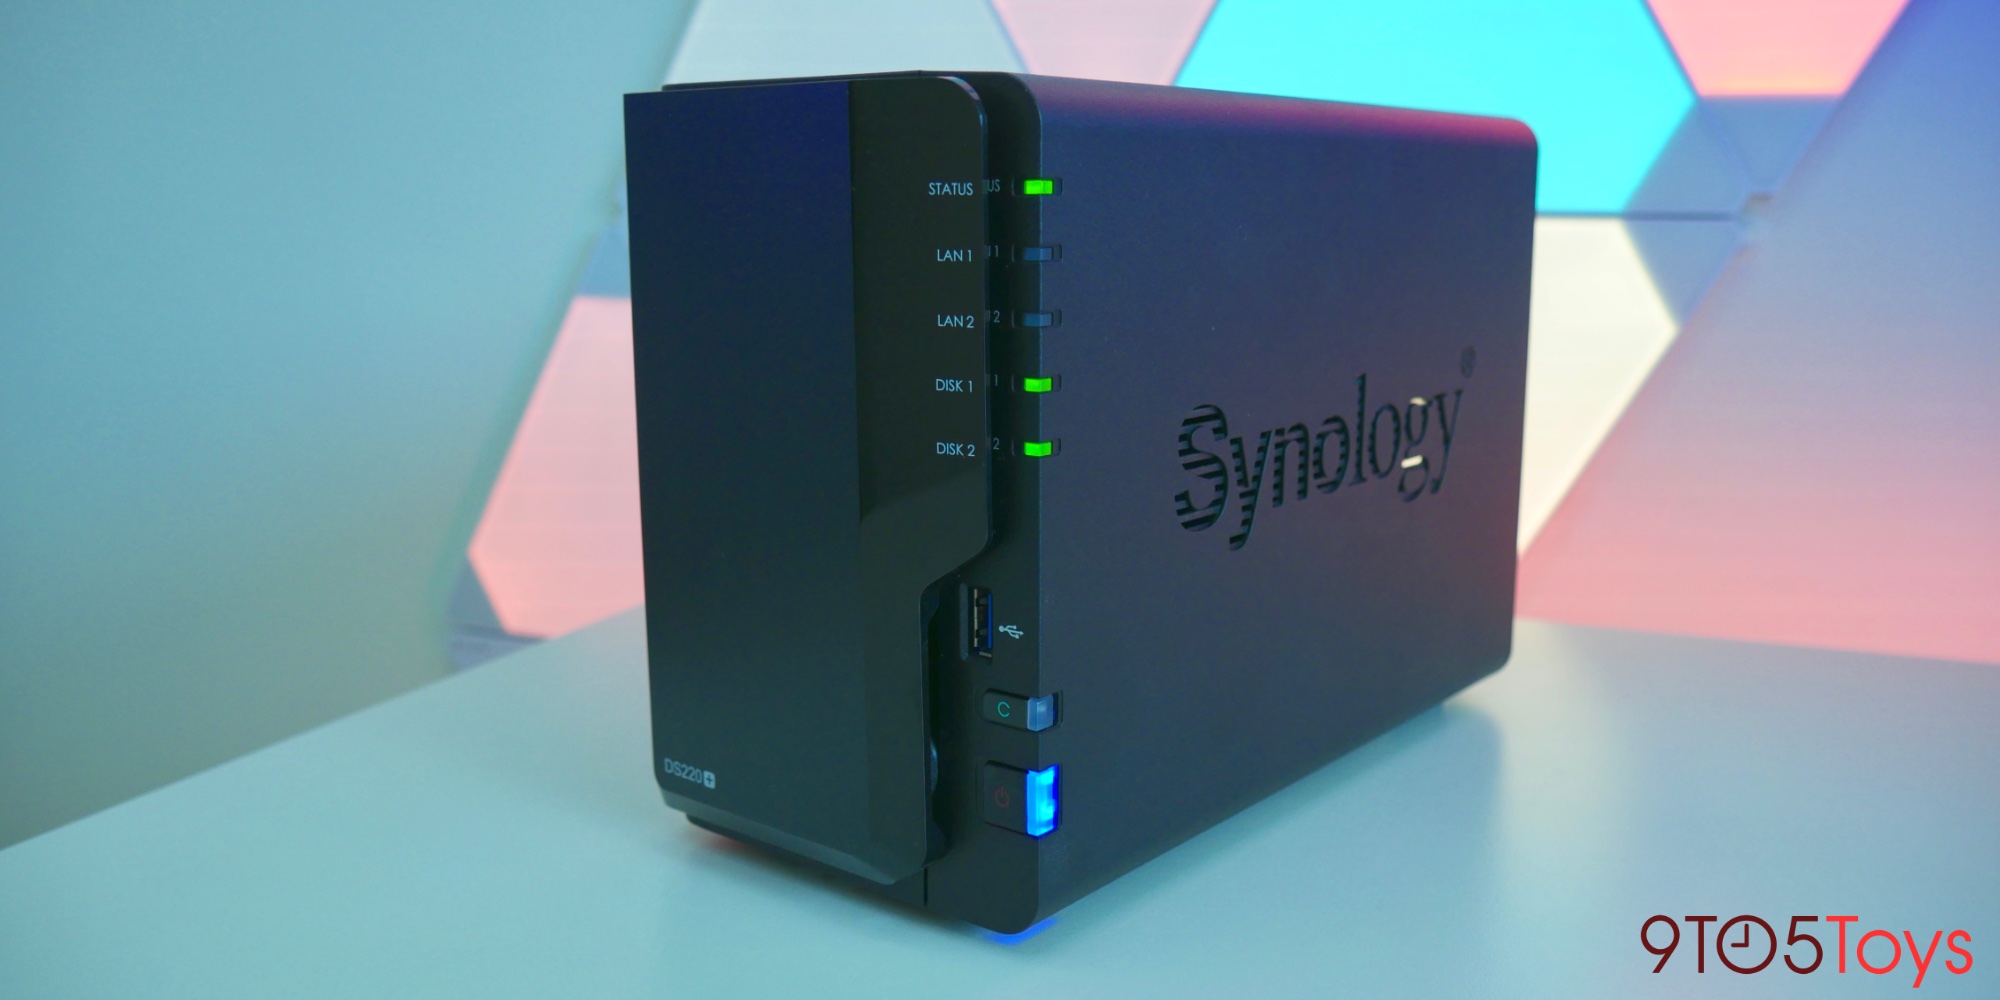 Synology DS220+ NAS debuts with dual networking, more - 9to5Toys